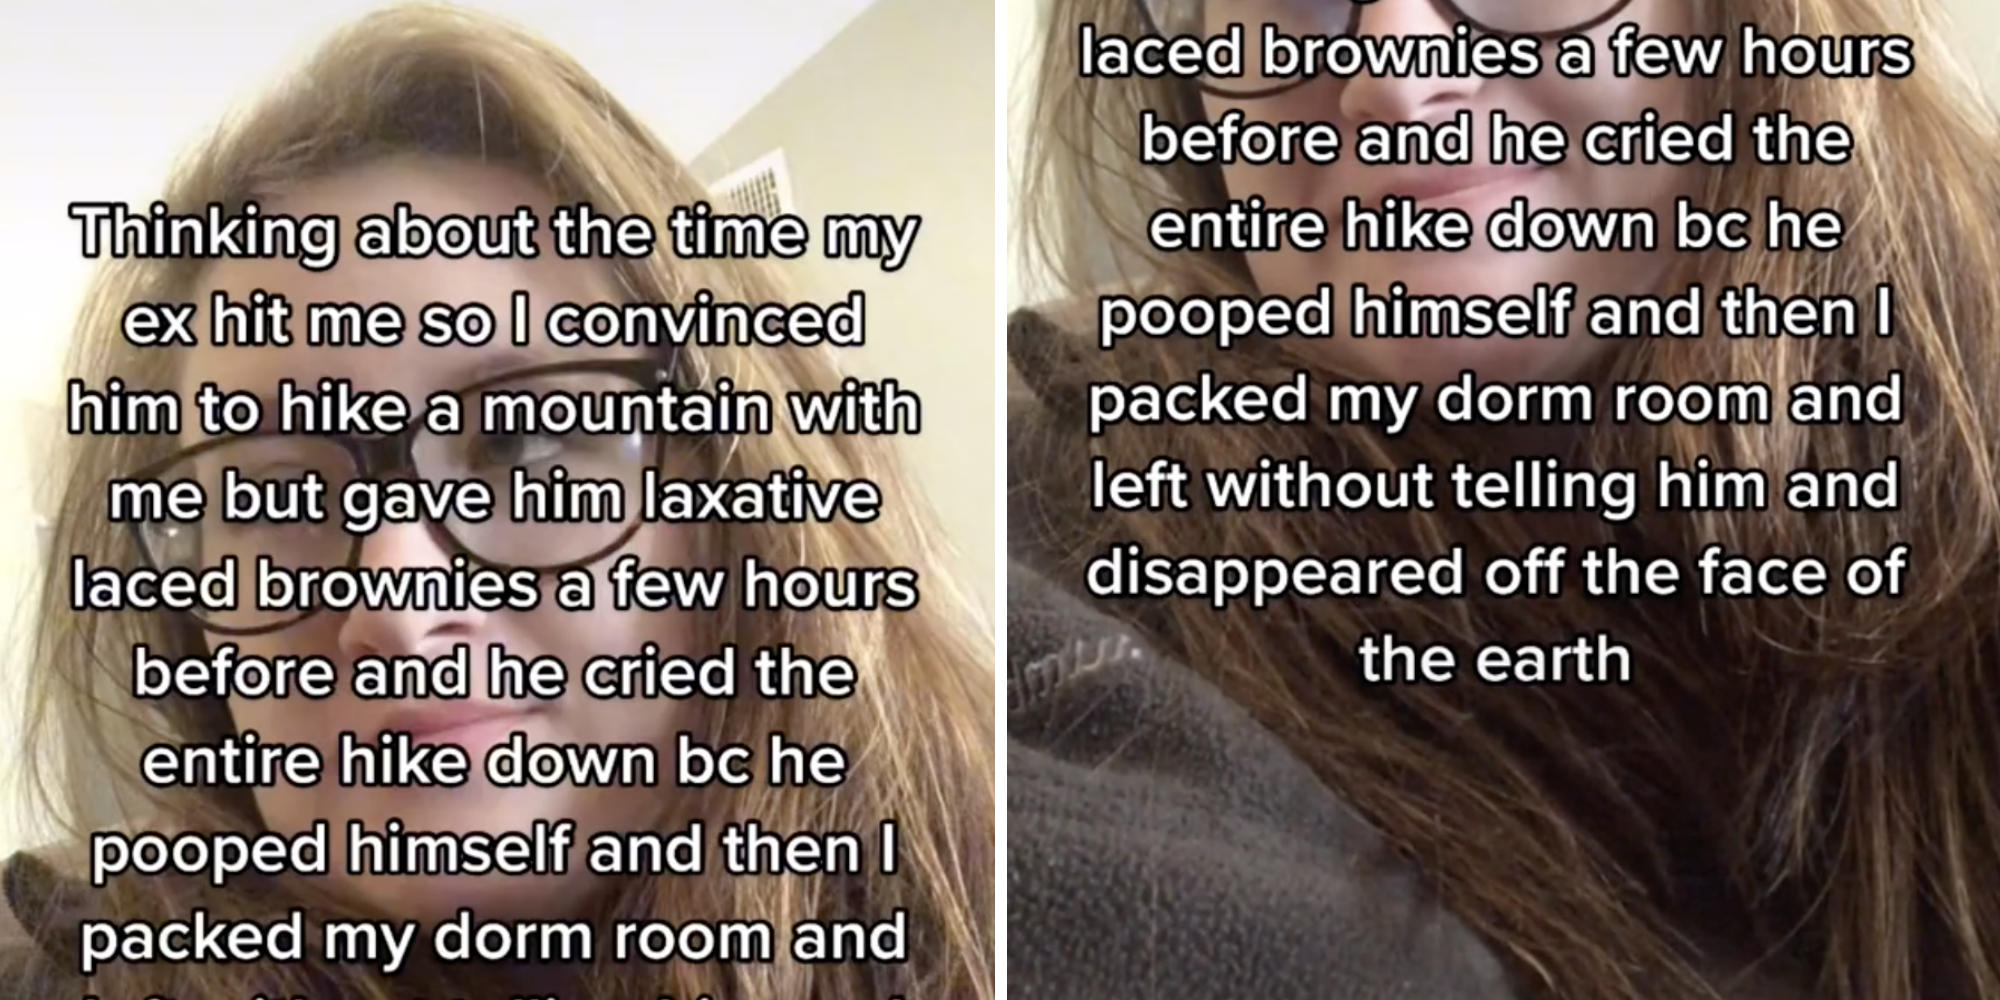 Woman Goes Viral After She Gave Abusive Boyfriend Laxative Brownies hq pic